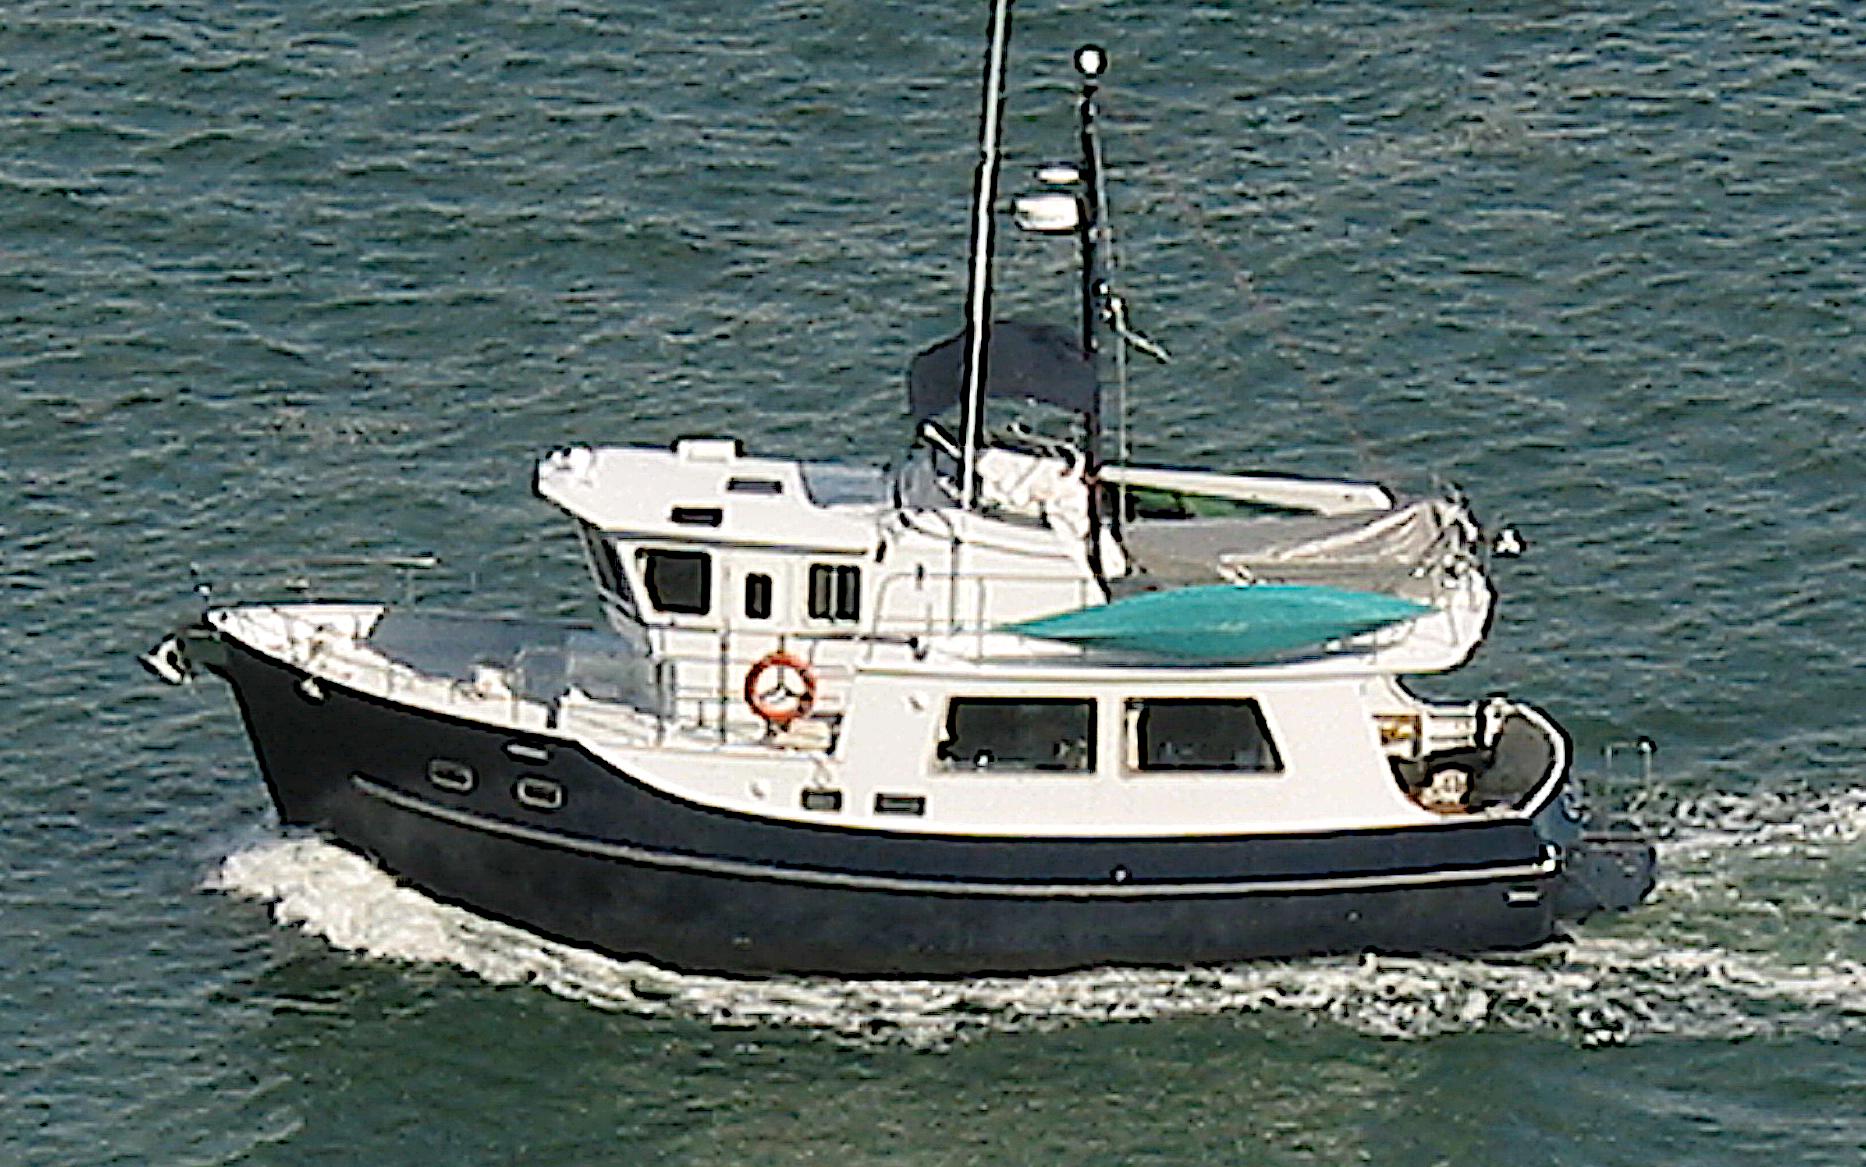 Seahorse - Yachts for Sale - Ocean Pacific Yachts